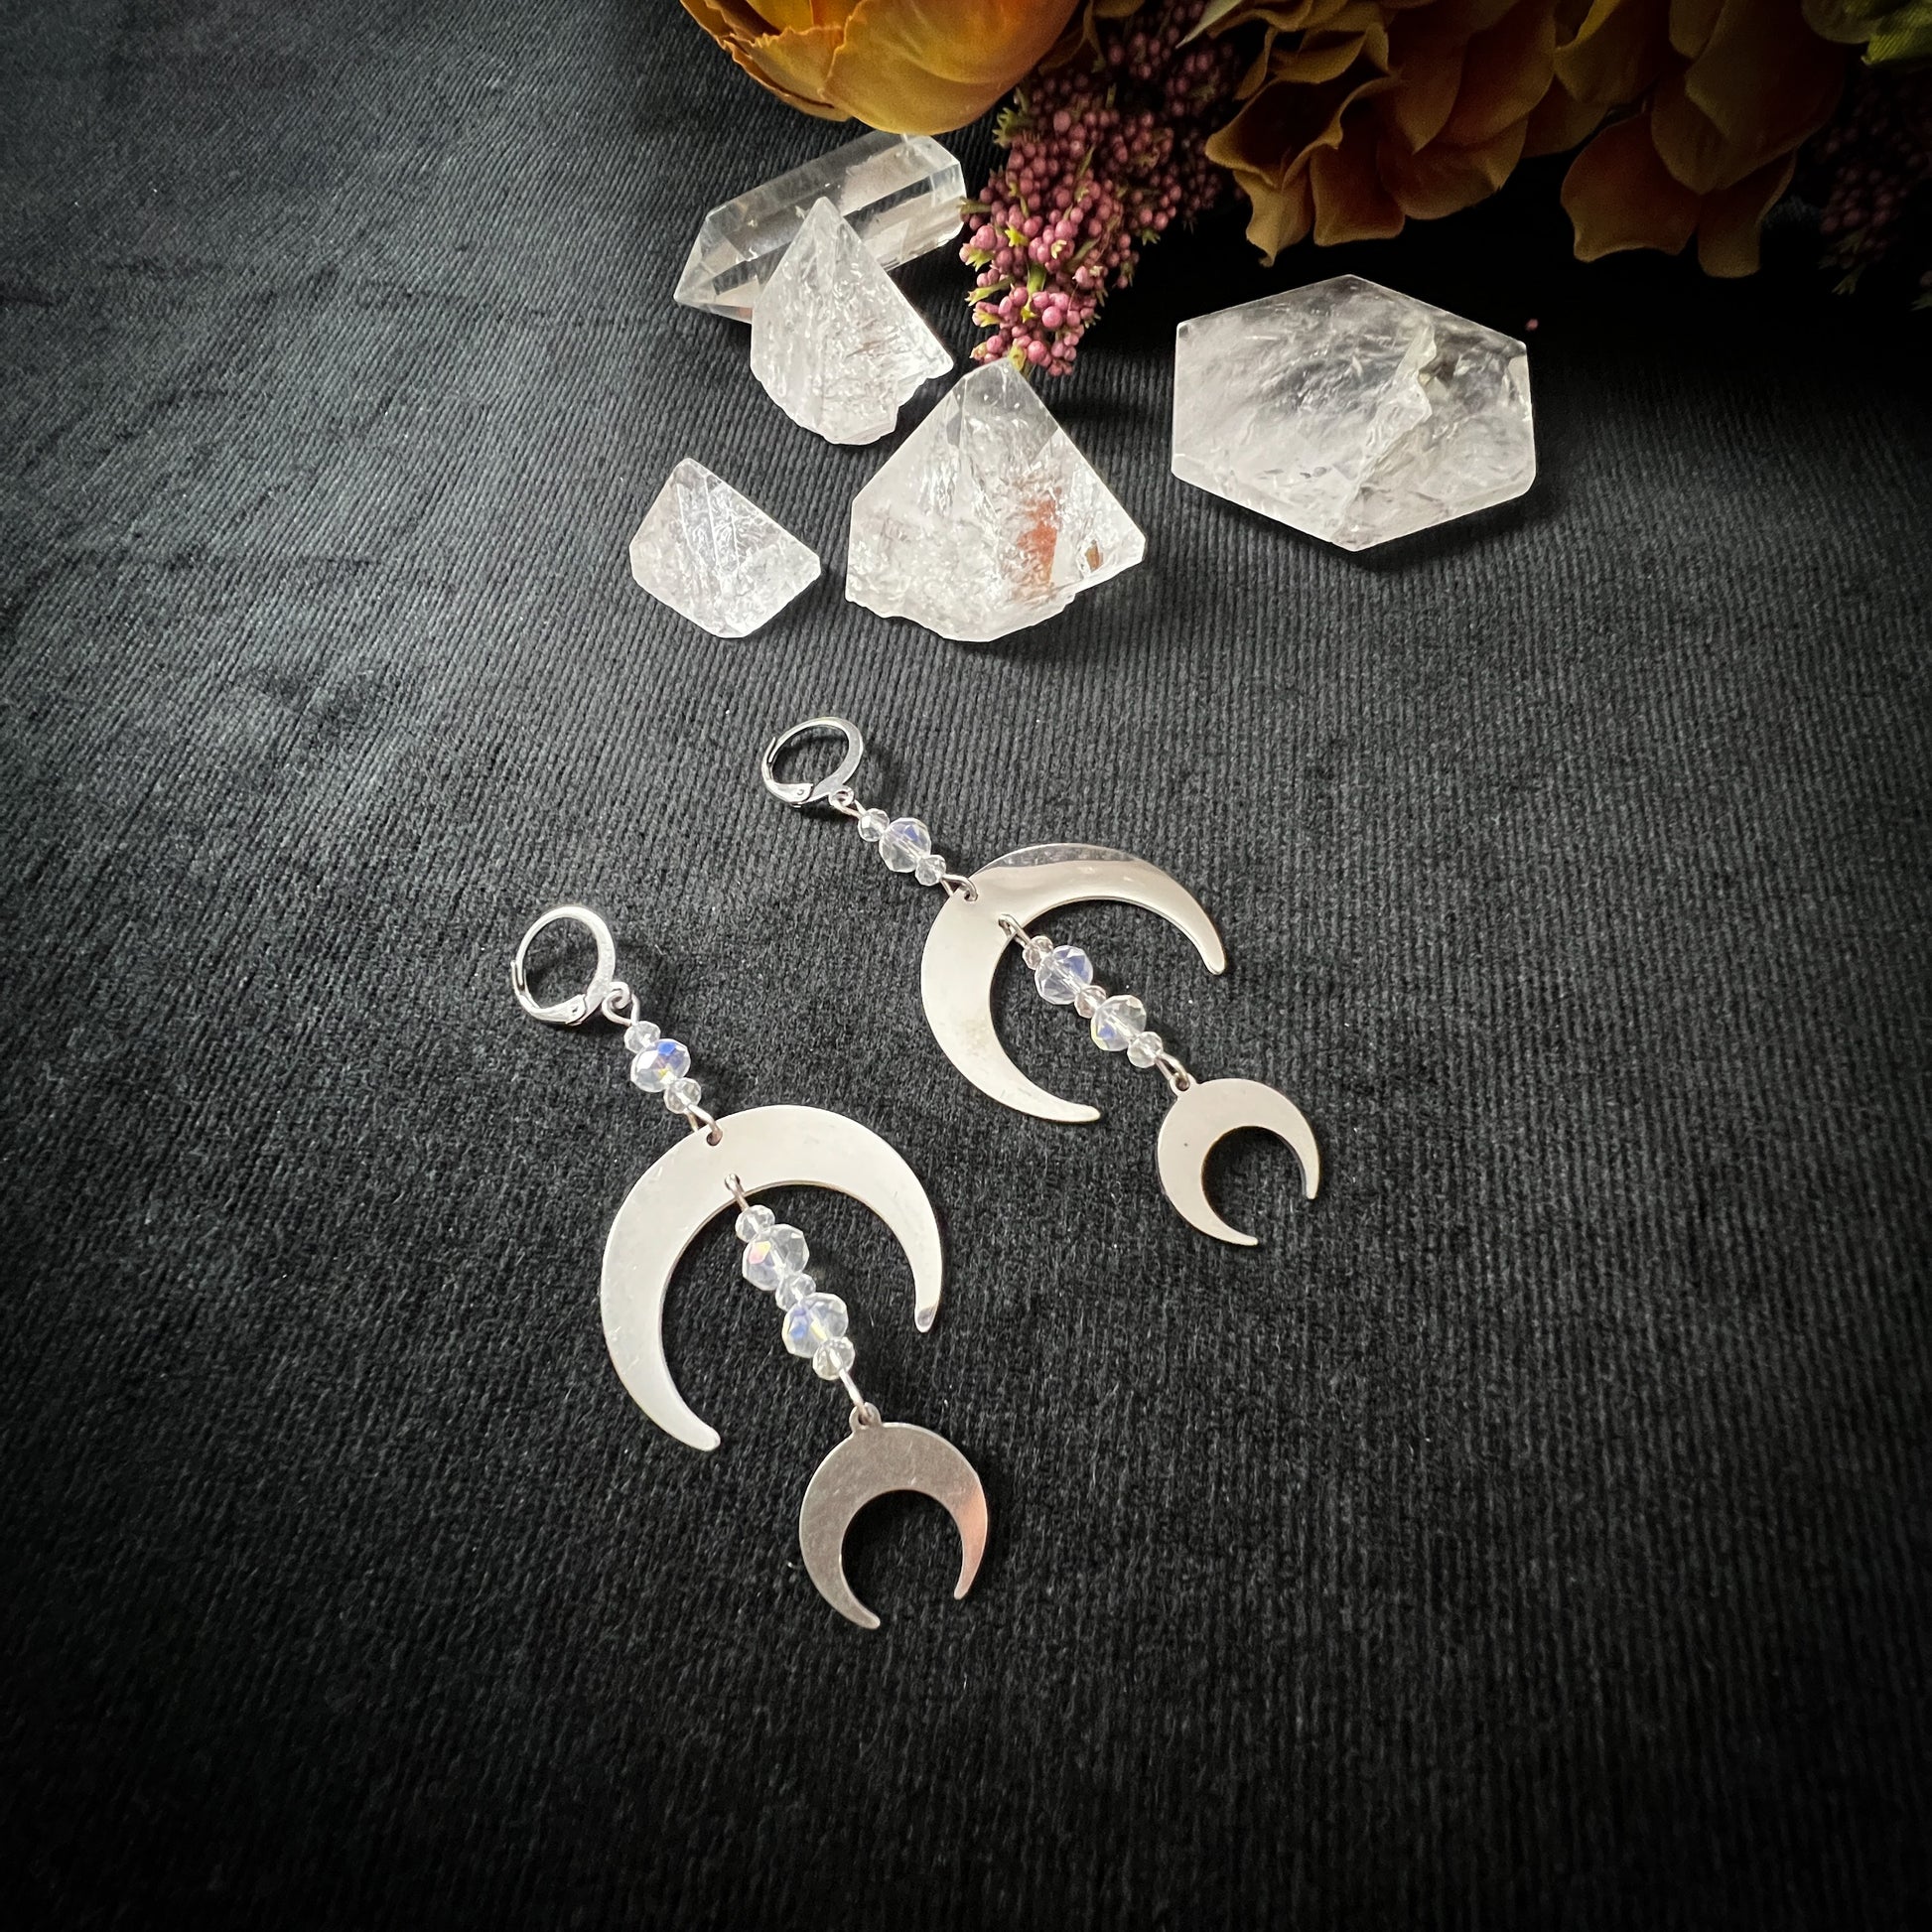 Moon crescents and crystals earrings made of stainless steel - The French Witch shop